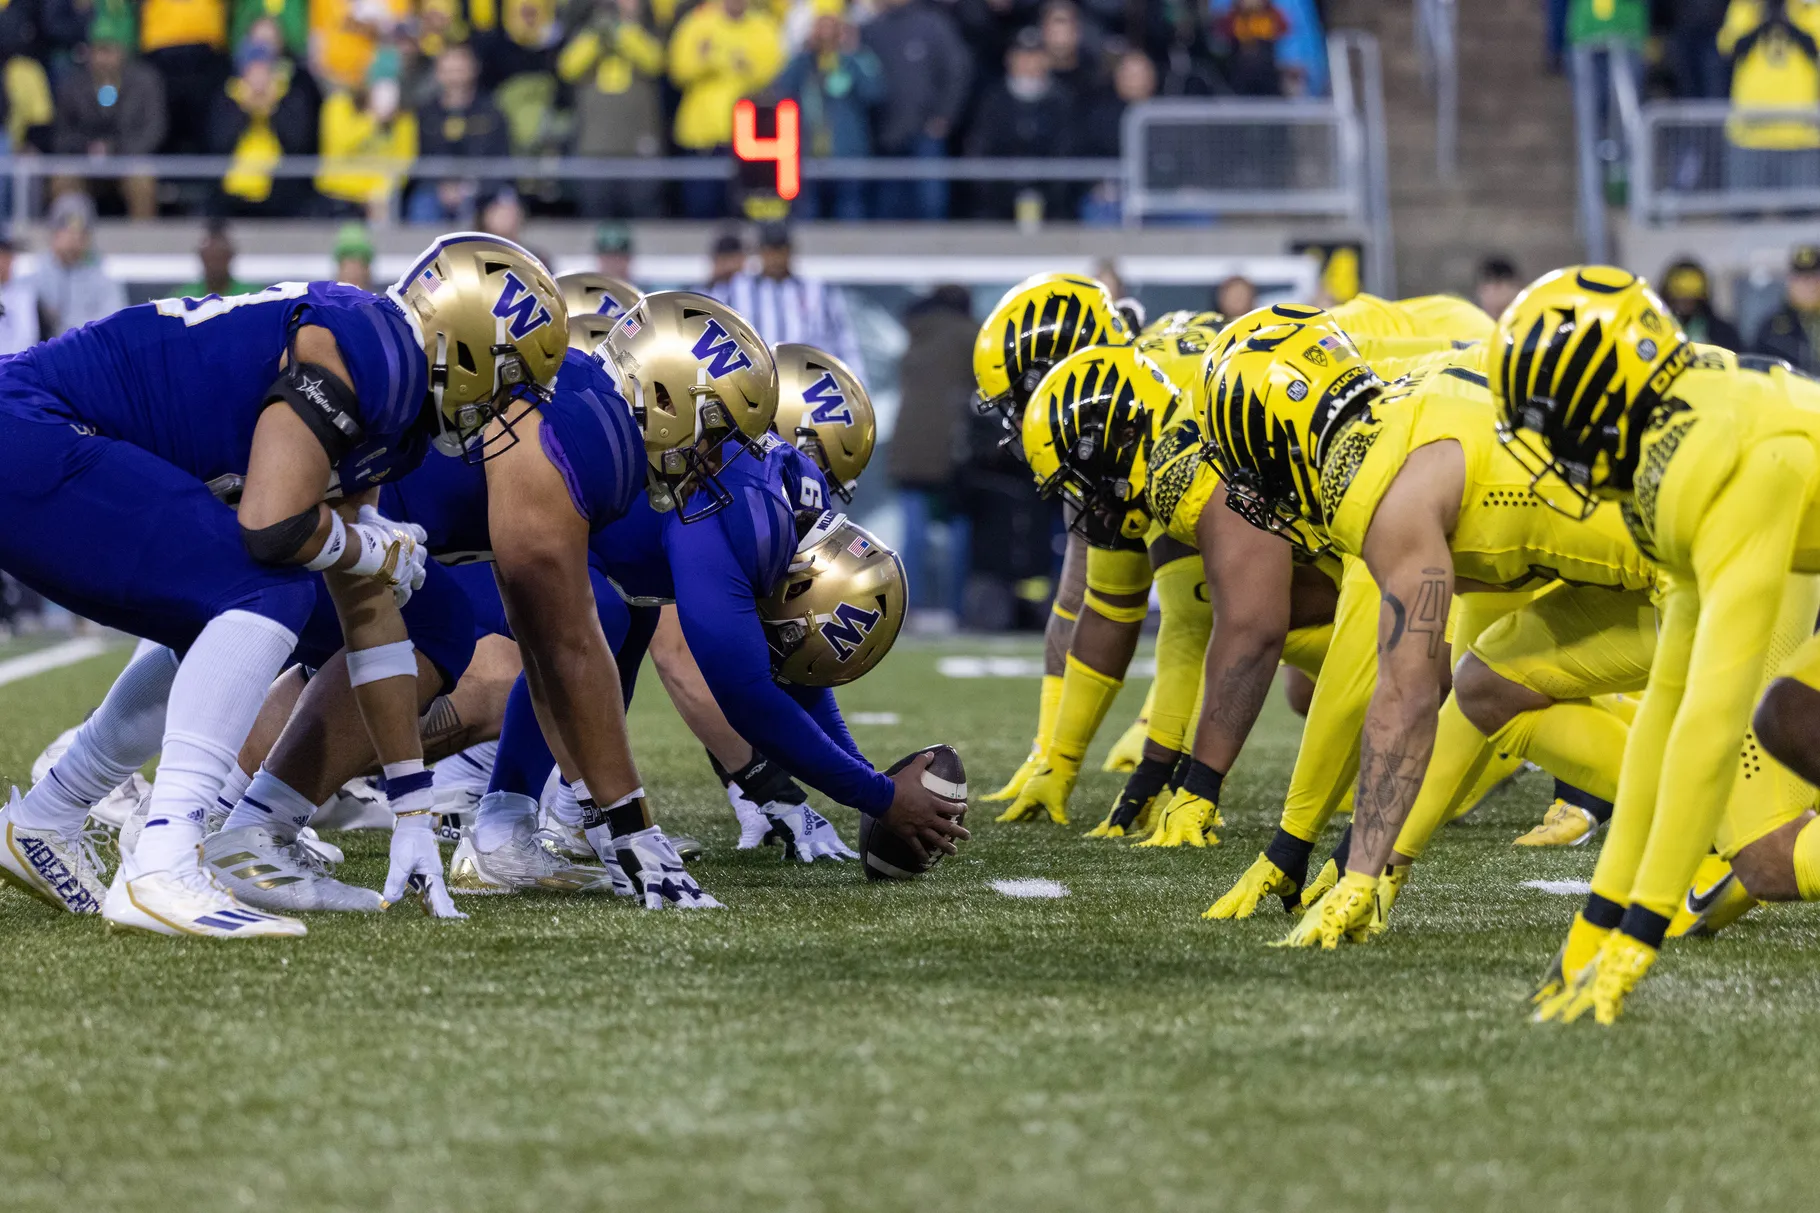 Big Ten takes Ducks and Huskies; Big 12 set to add 3 more from struggling Pac-12